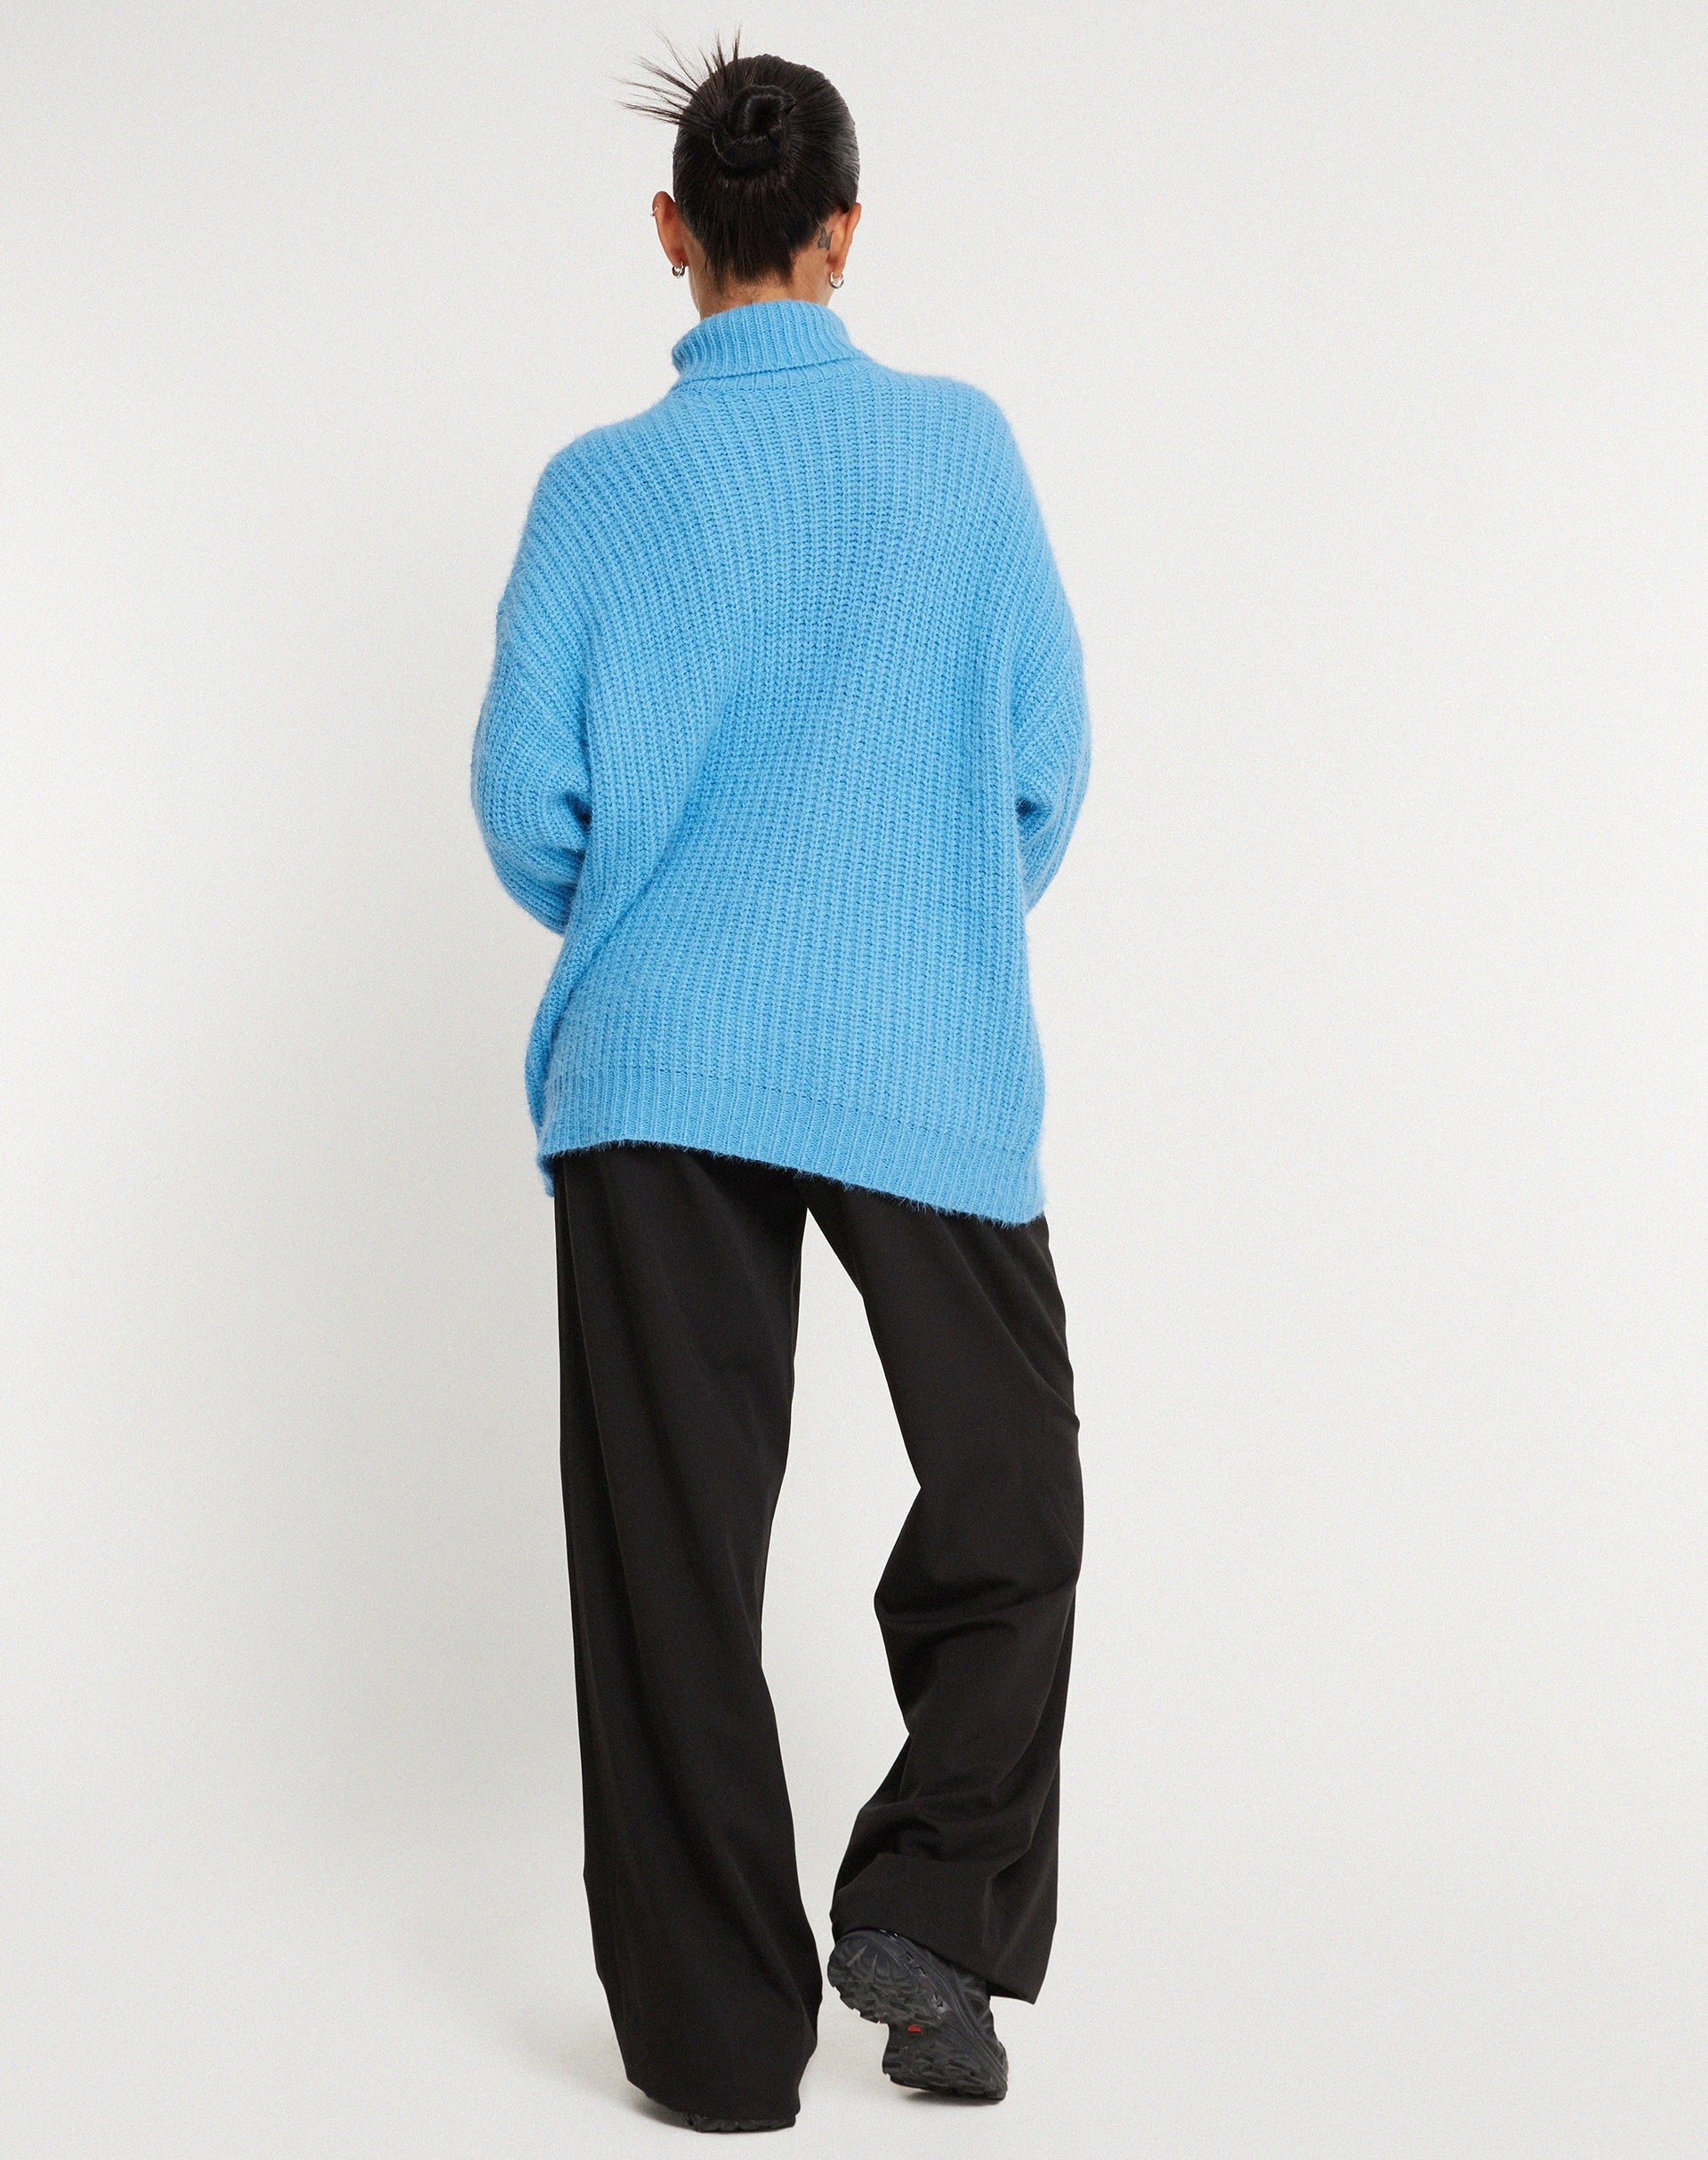 image of Mada Jumper in Knit Blue